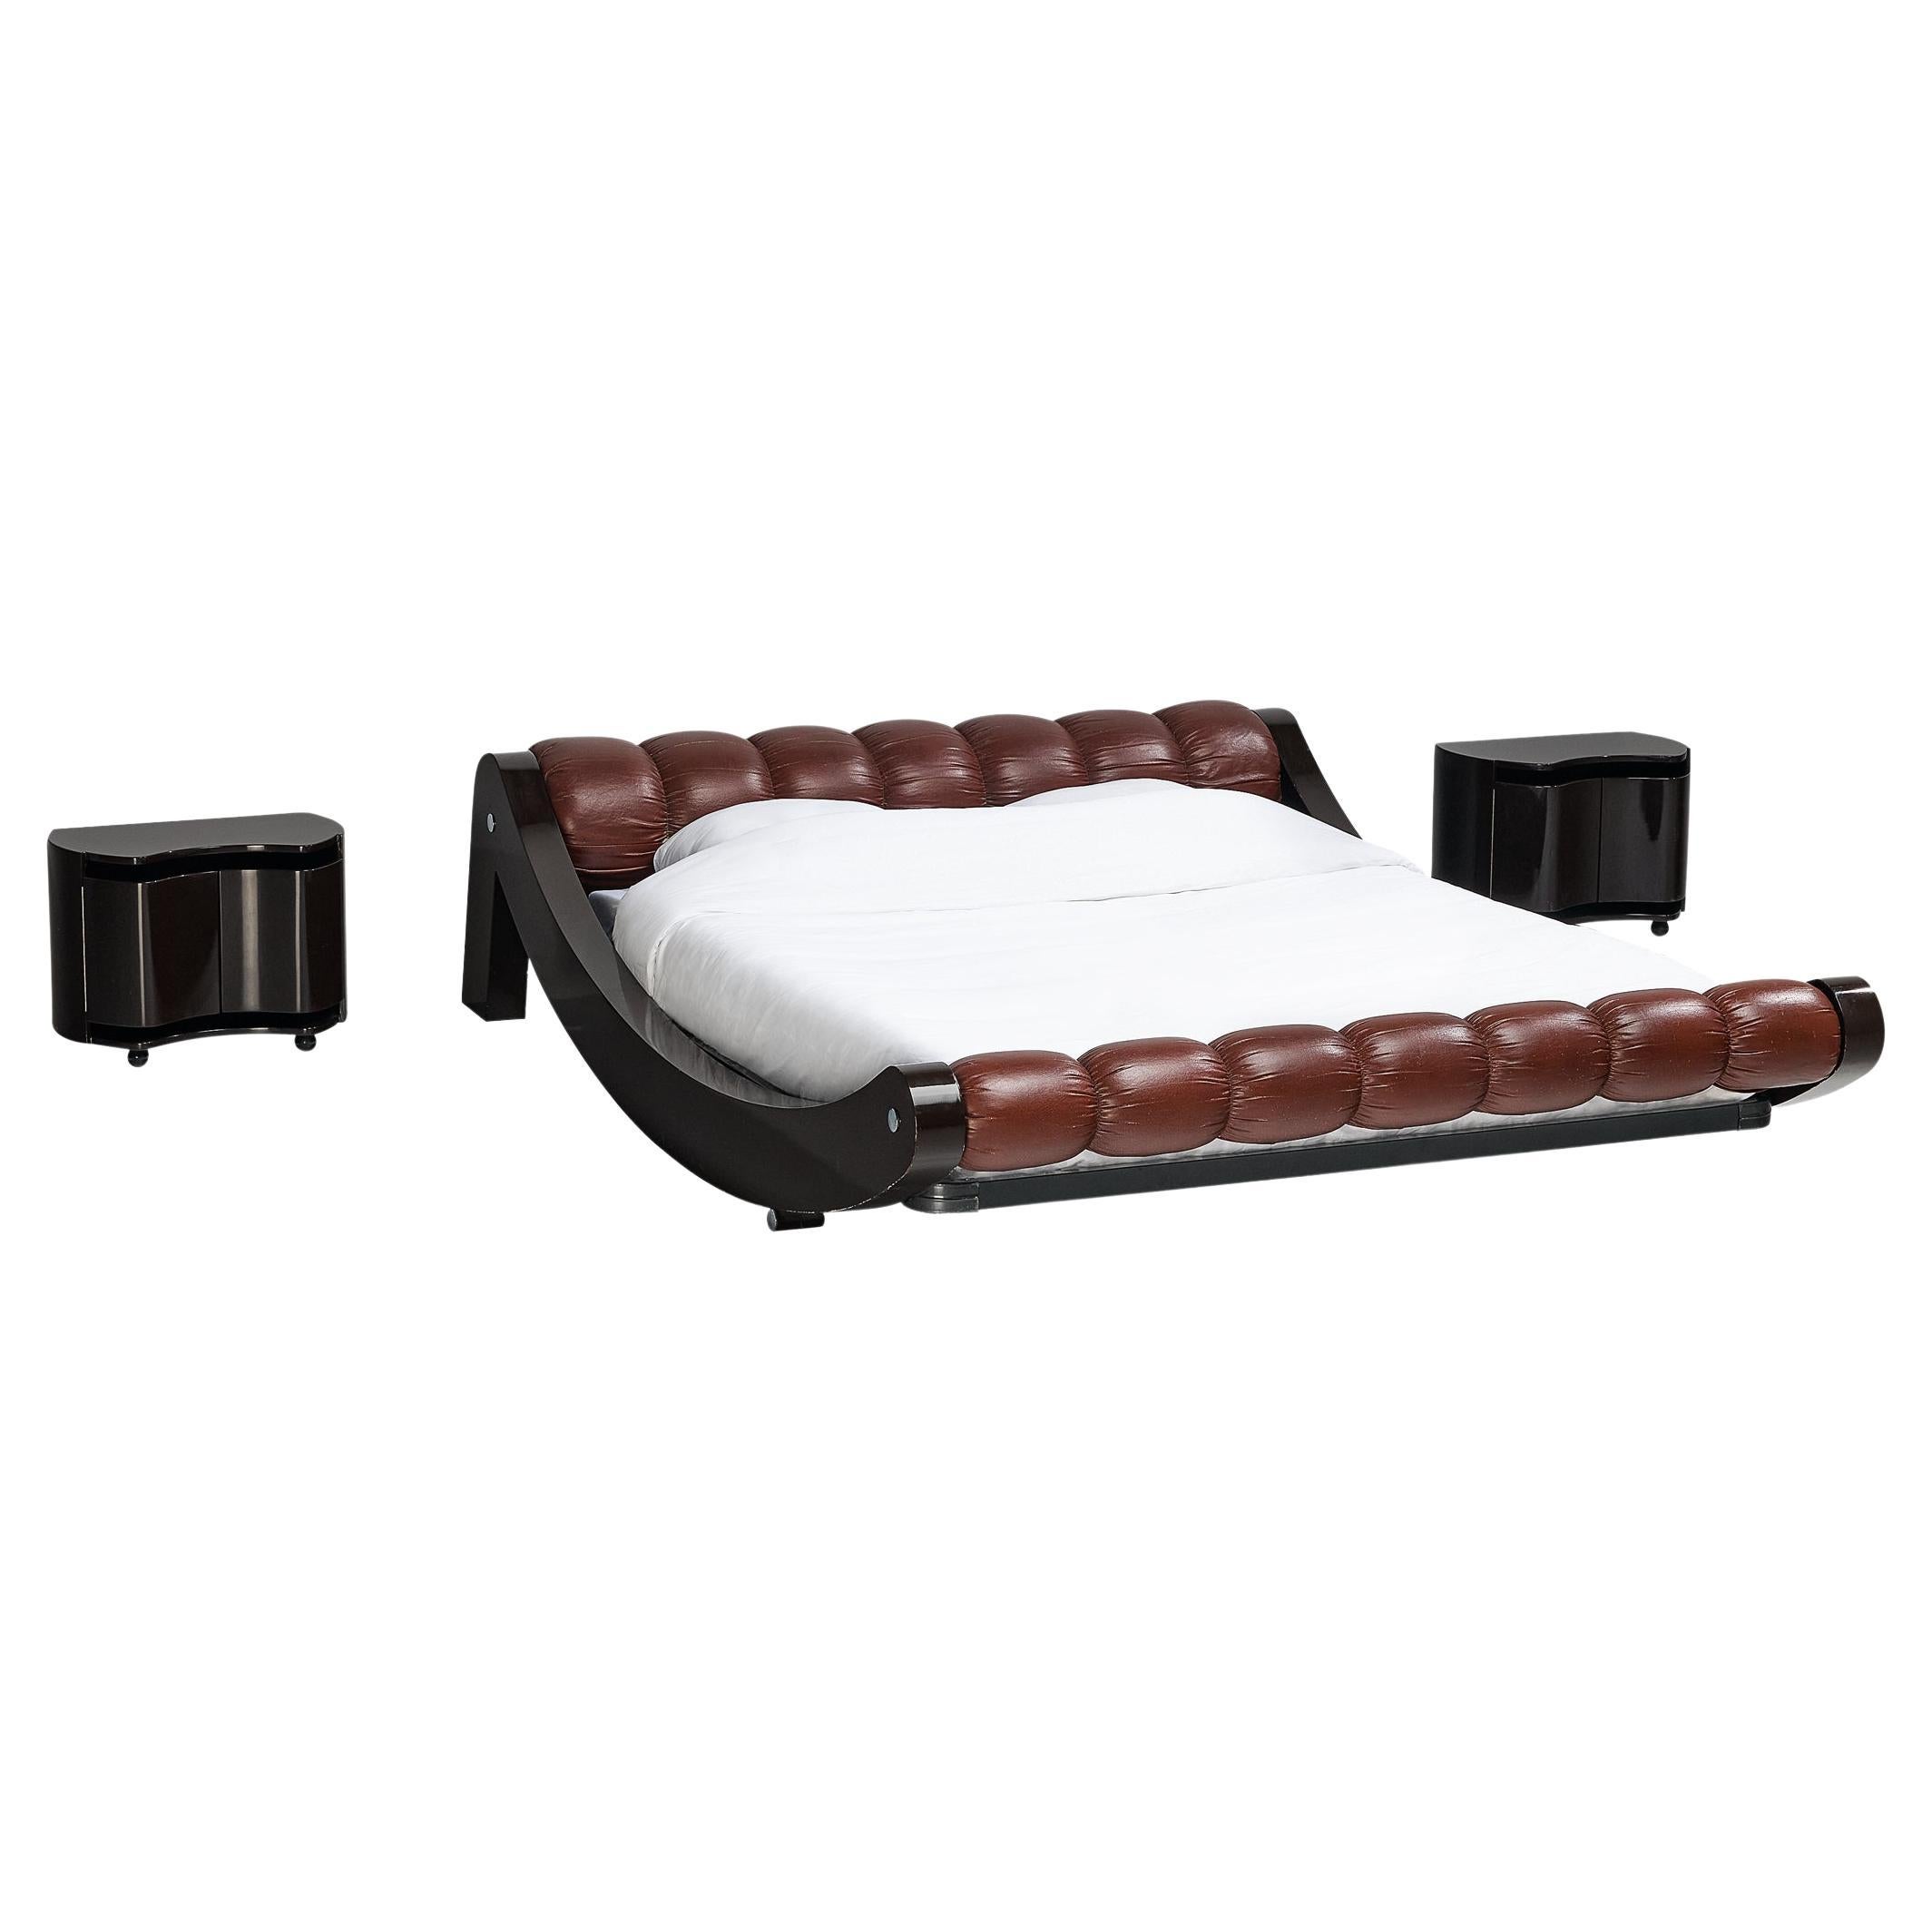 Benatti Bed Room Set with 'Boomerang' Queen Bed and 'Aiace' Nightstands 